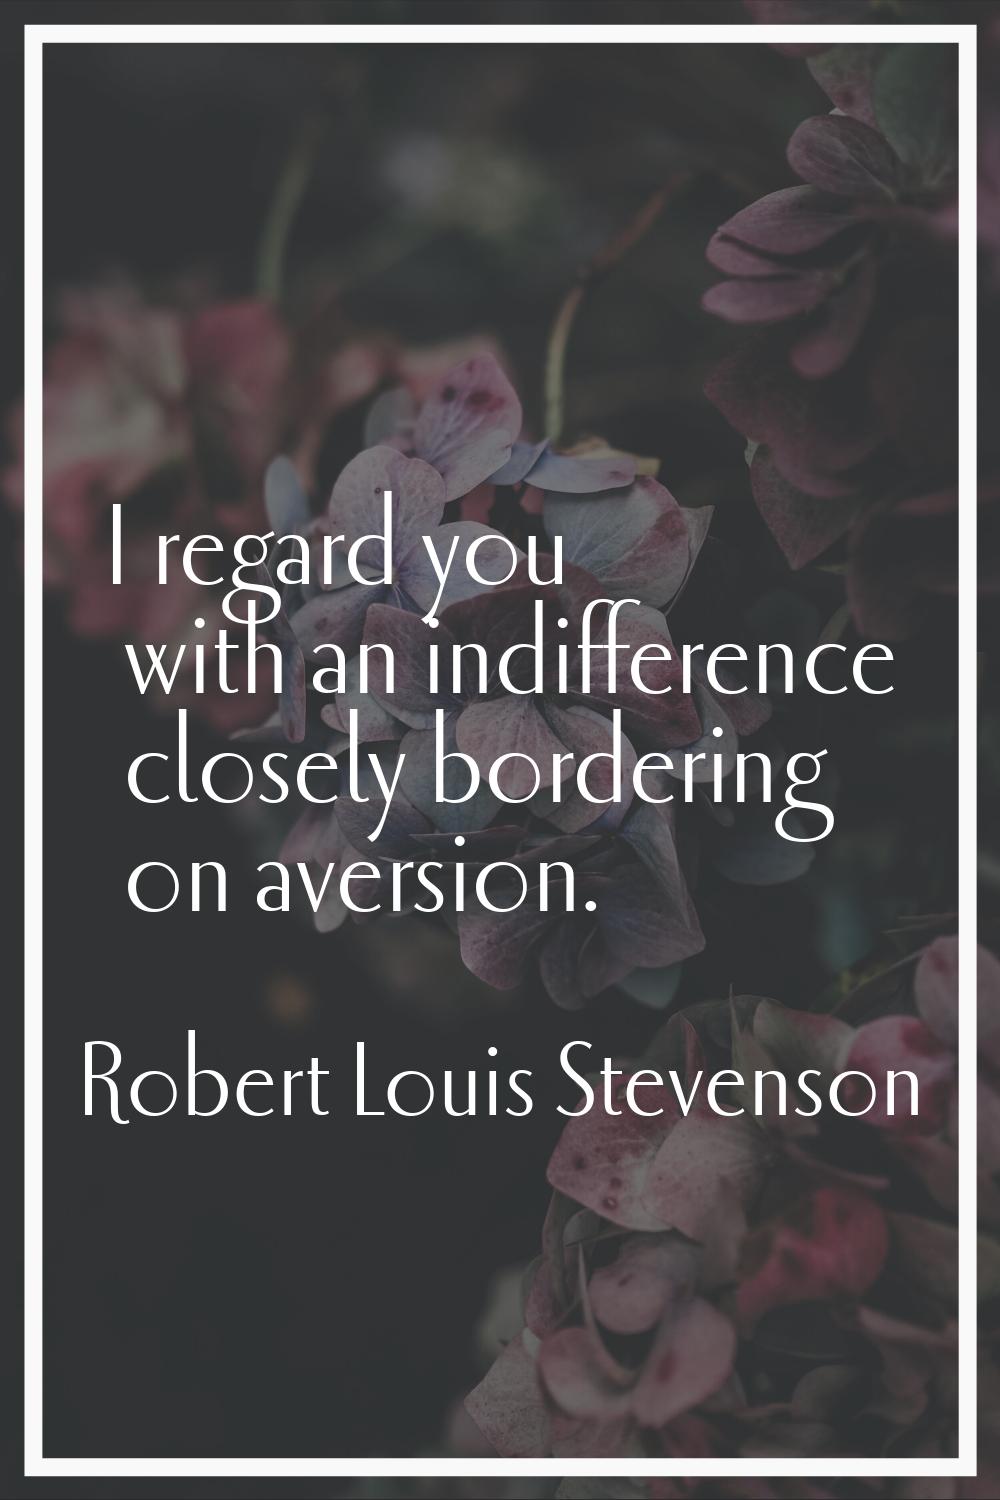 I regard you with an indifference closely bordering on aversion.